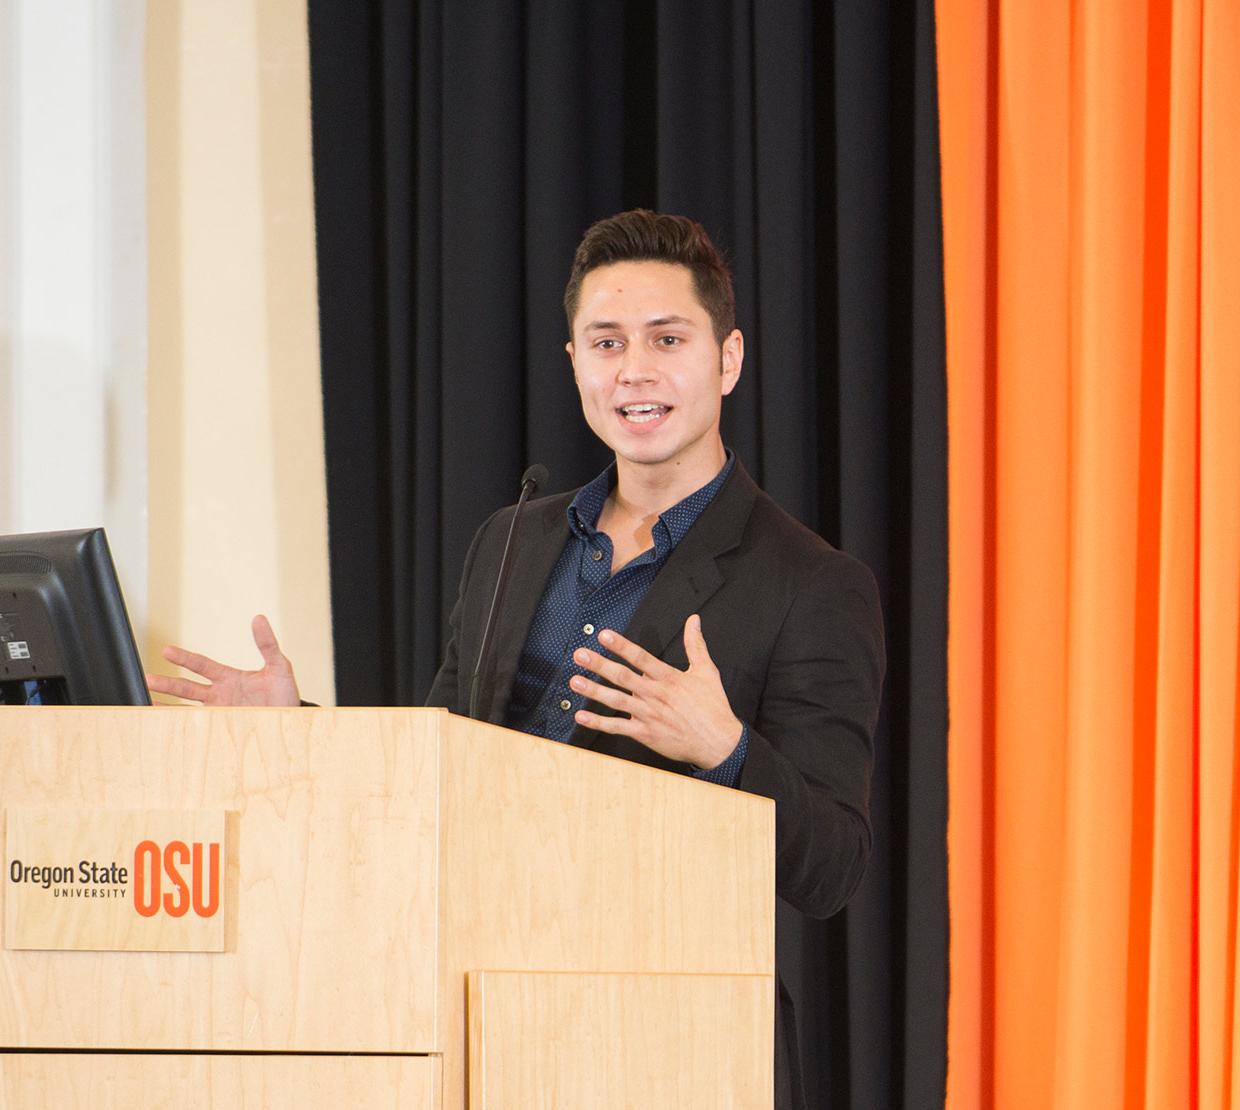 Jackson Dougan giving lecture on OSU's campus